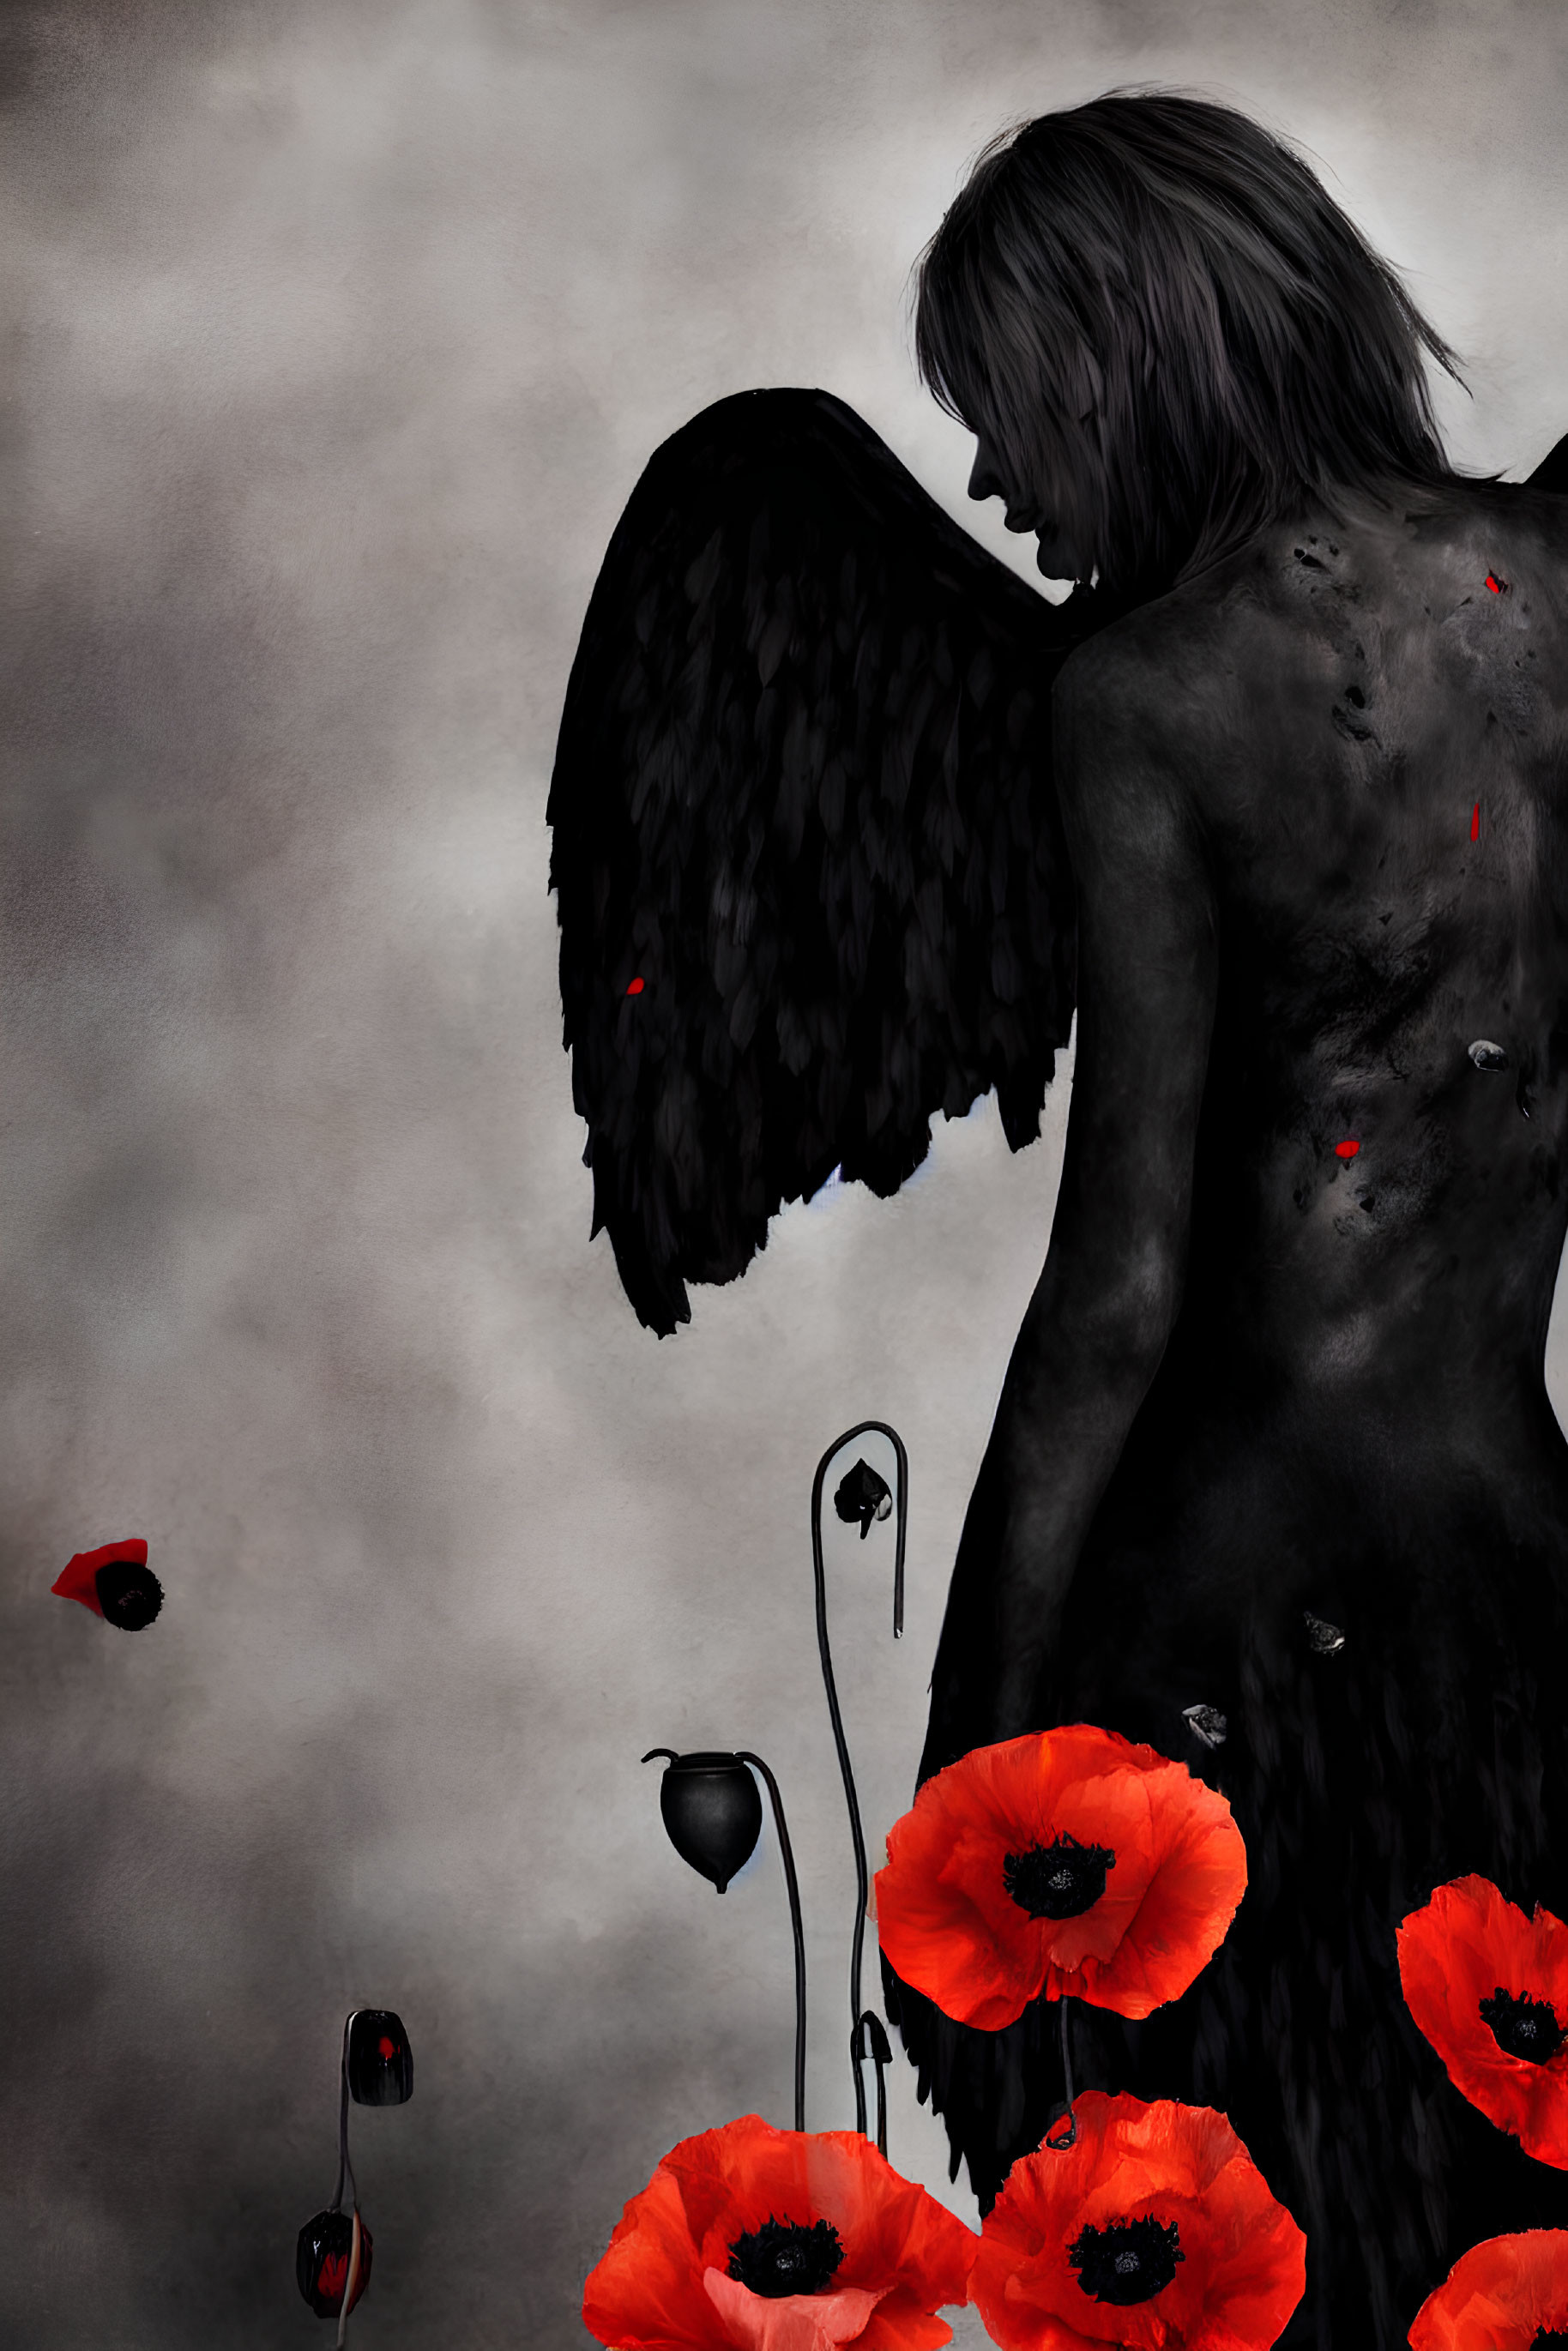 Somber figure with black wings in red poppies scene